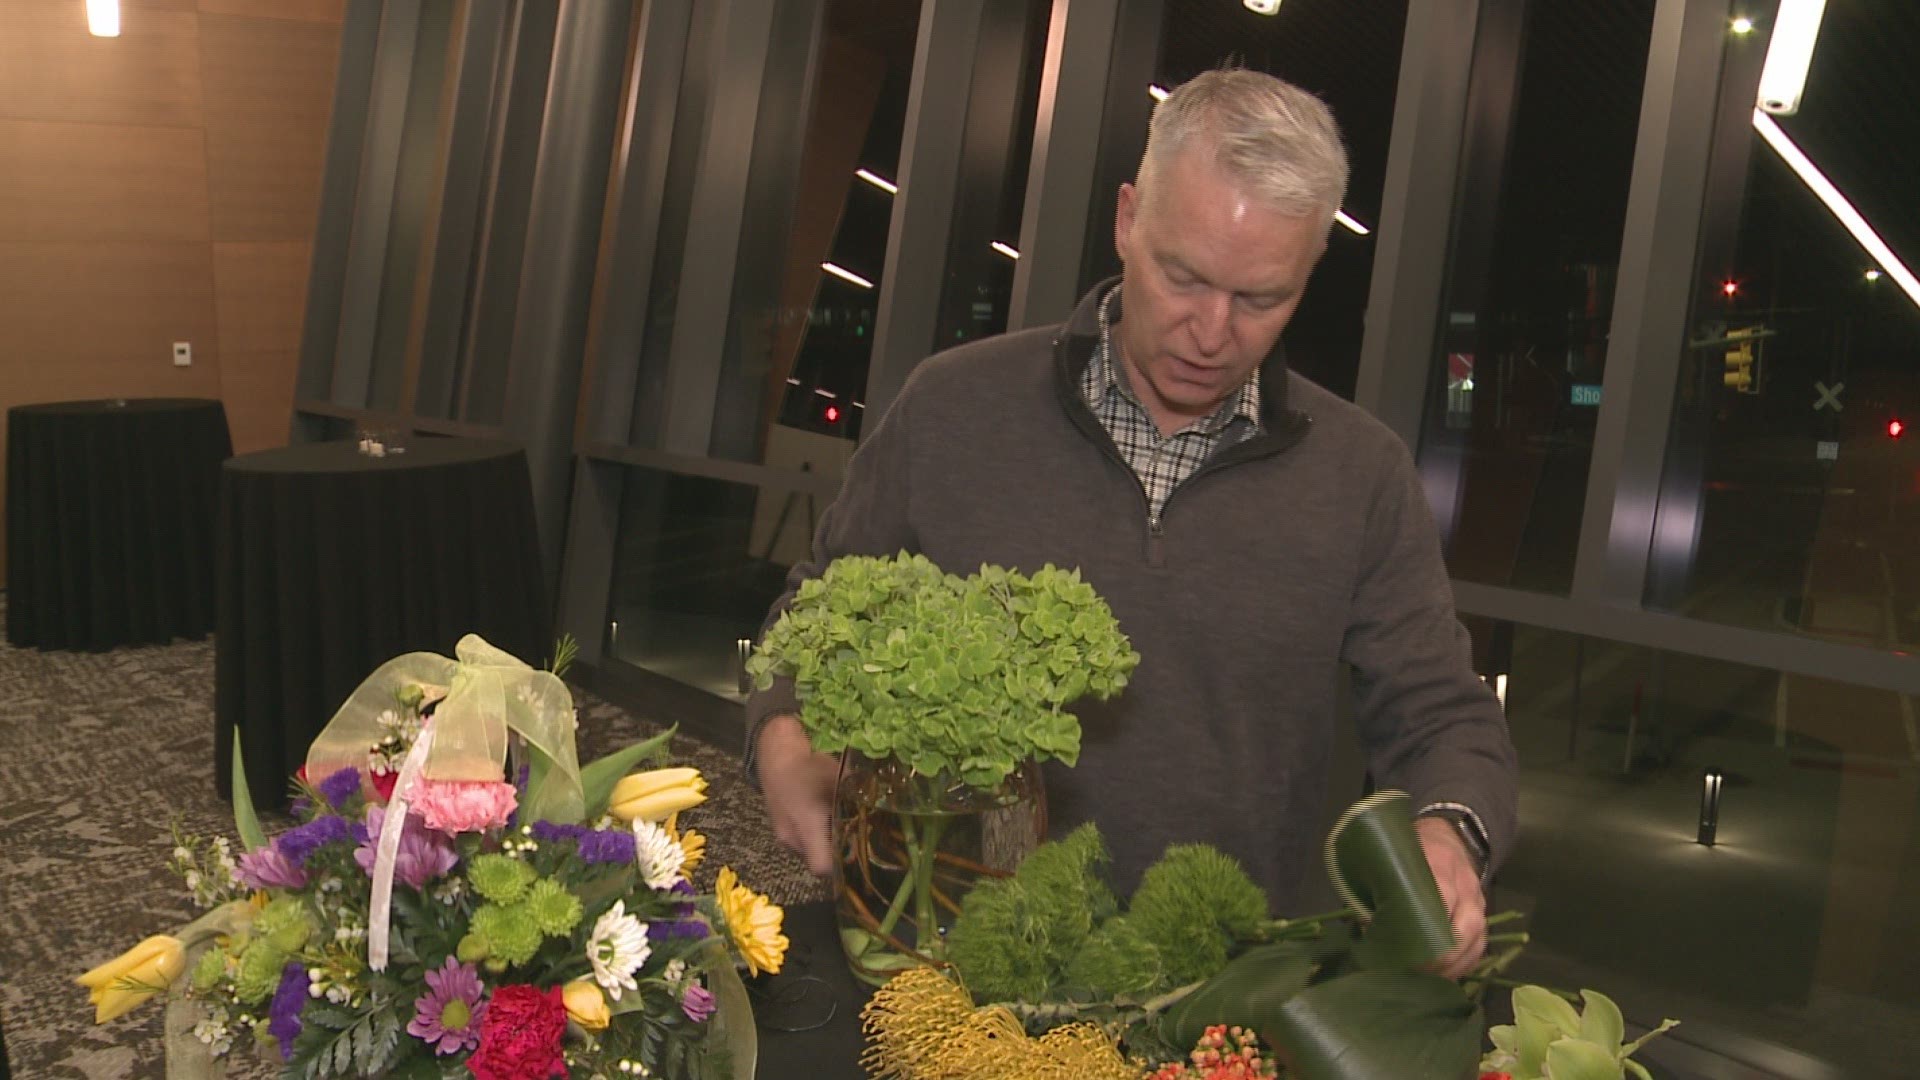 Skeeter Parkhouse of Wasserman’s Flowers and Gifts explains how to care for and make a floral arrangement for your home using fresh flowers.